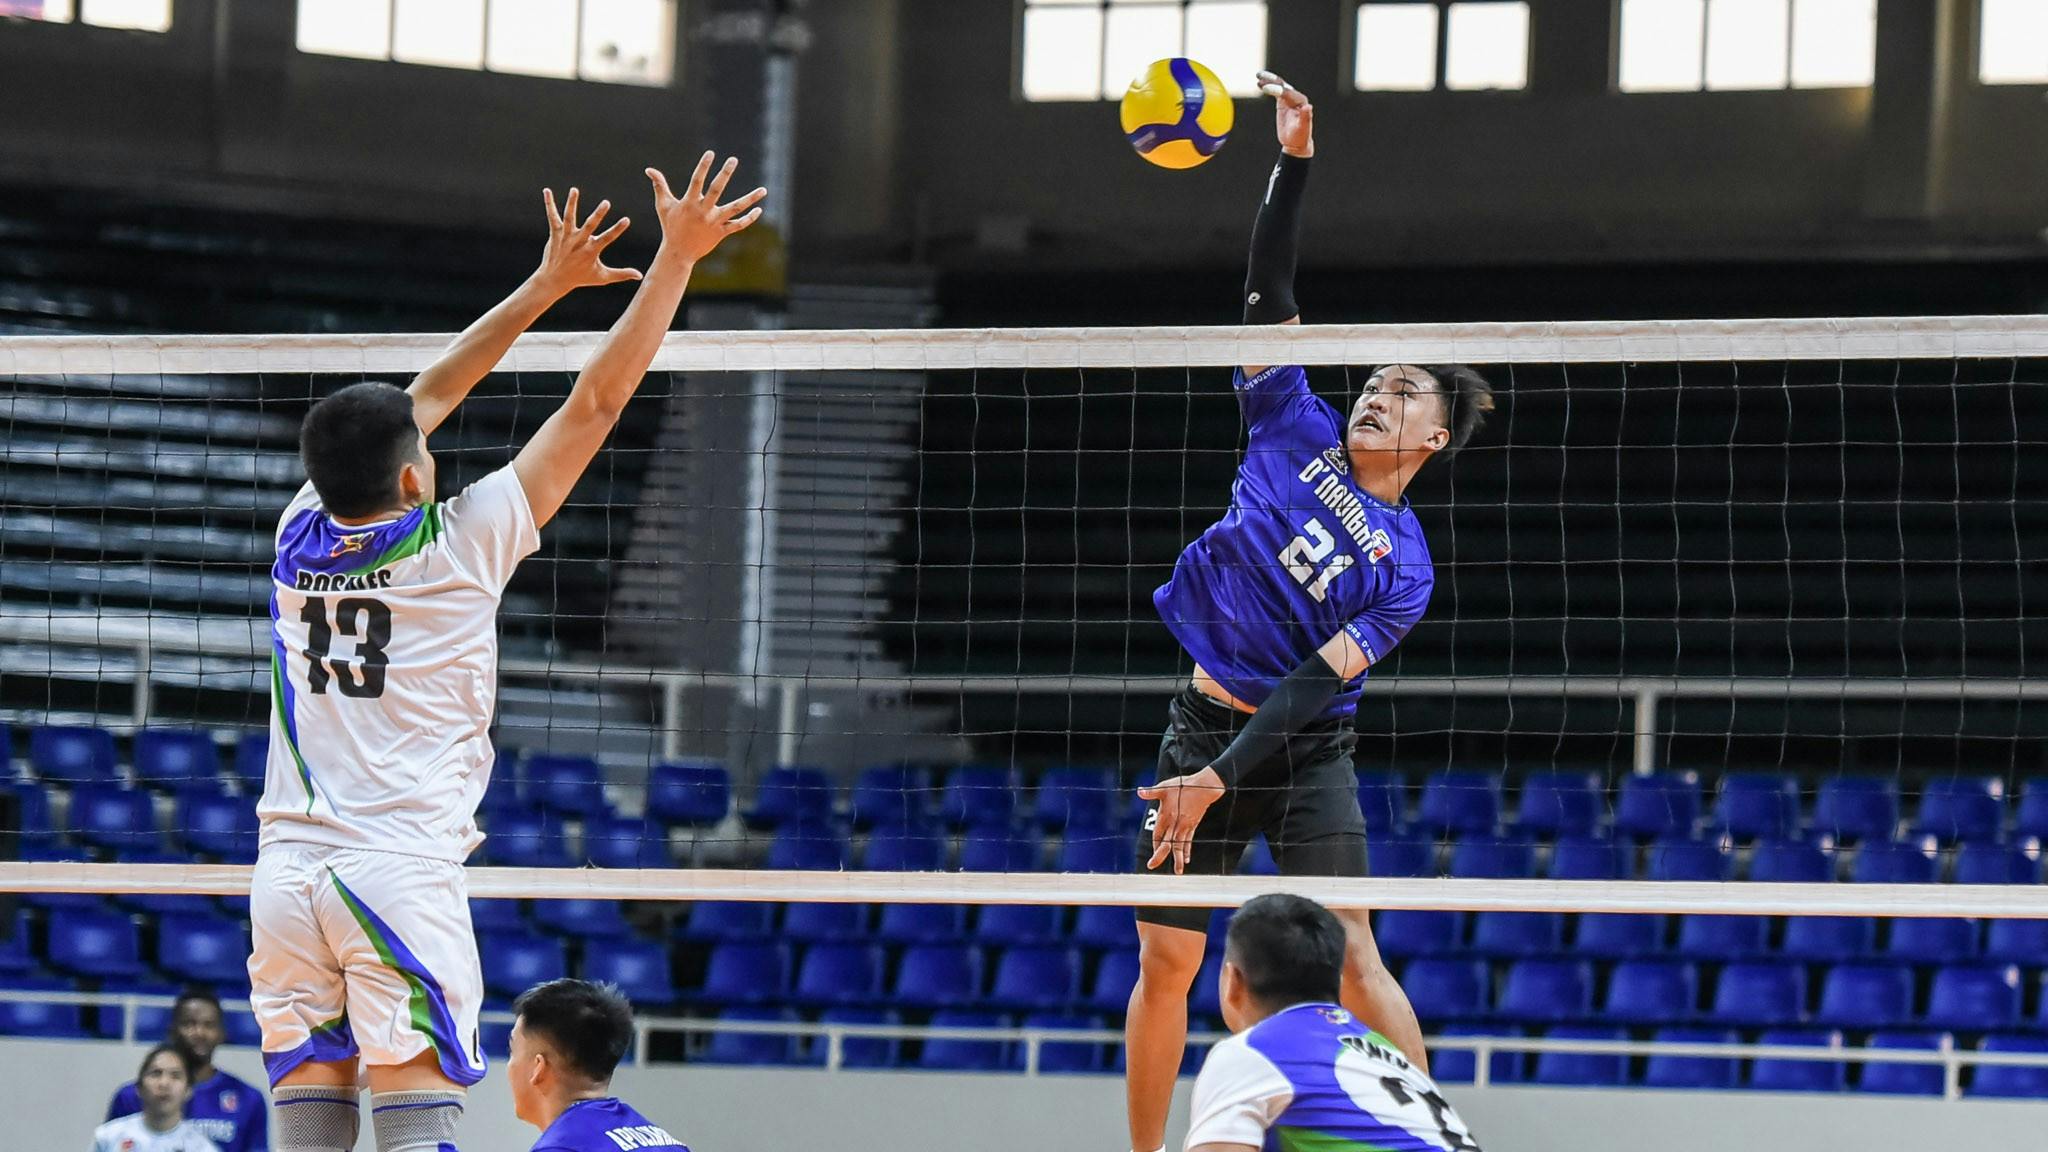 Jade Disquitado nails conference-high 34 points to bring Iloilo closer to bronze